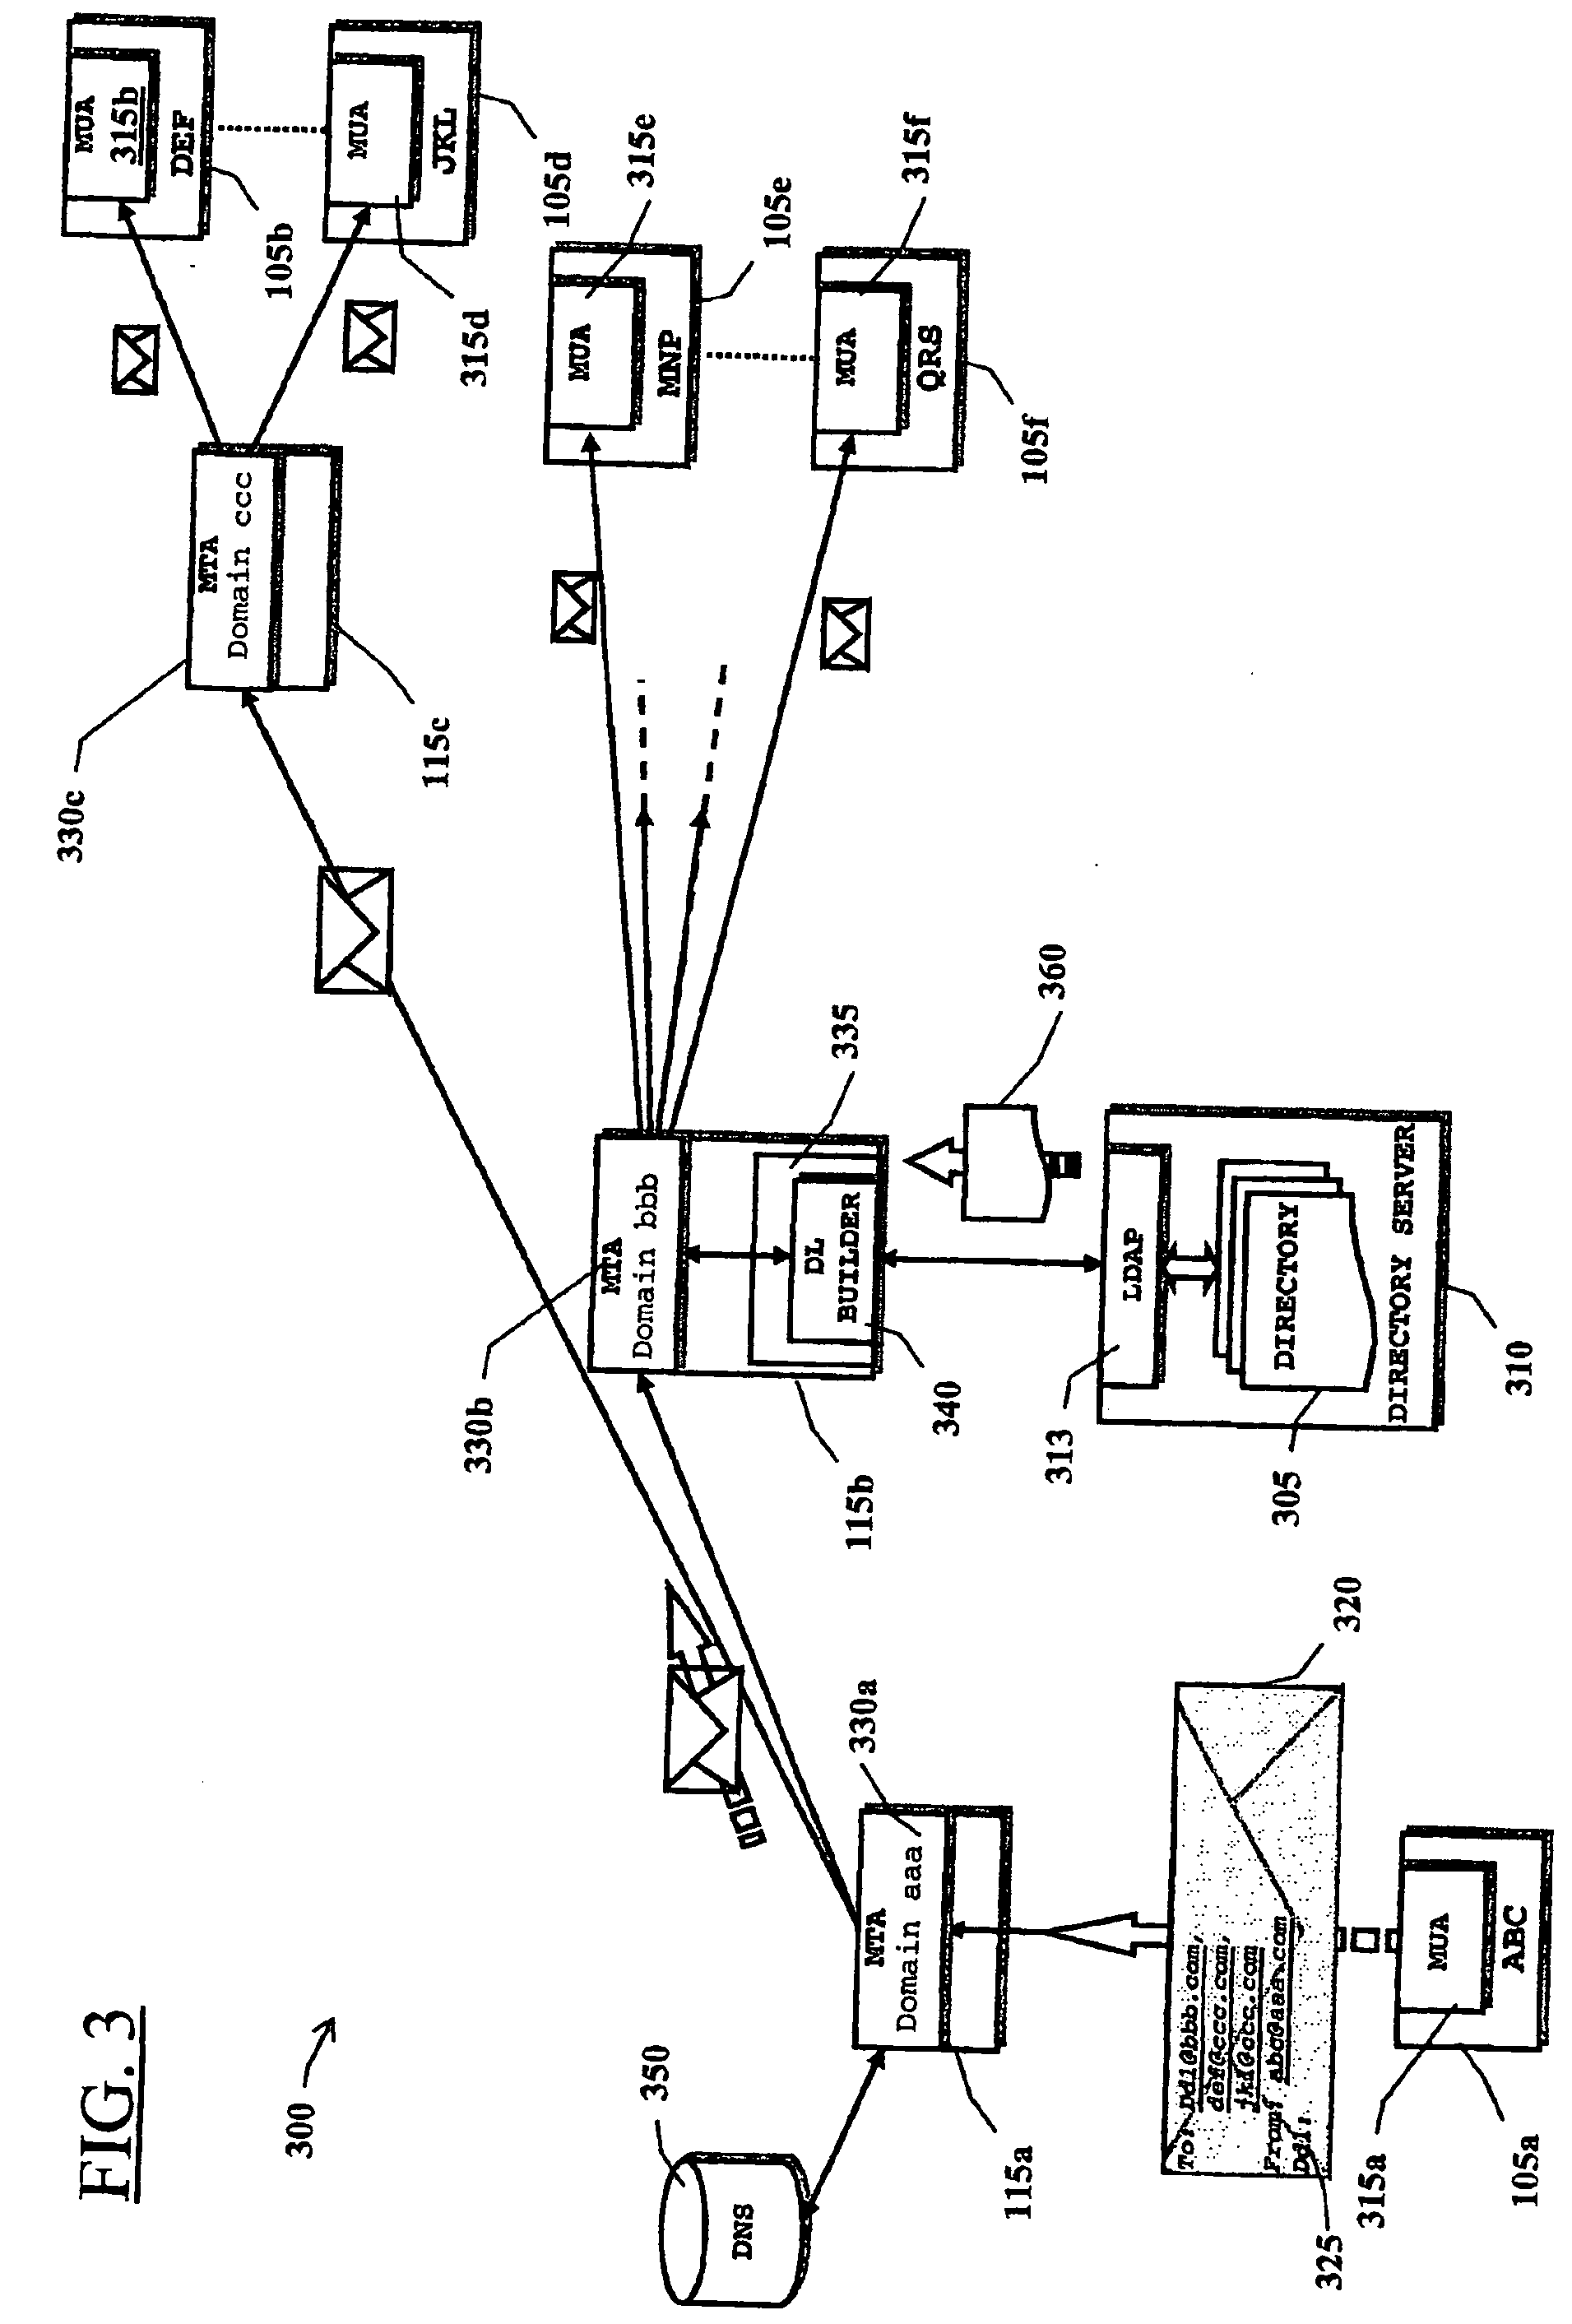 Method and system for distributing e-mail messages to recipients